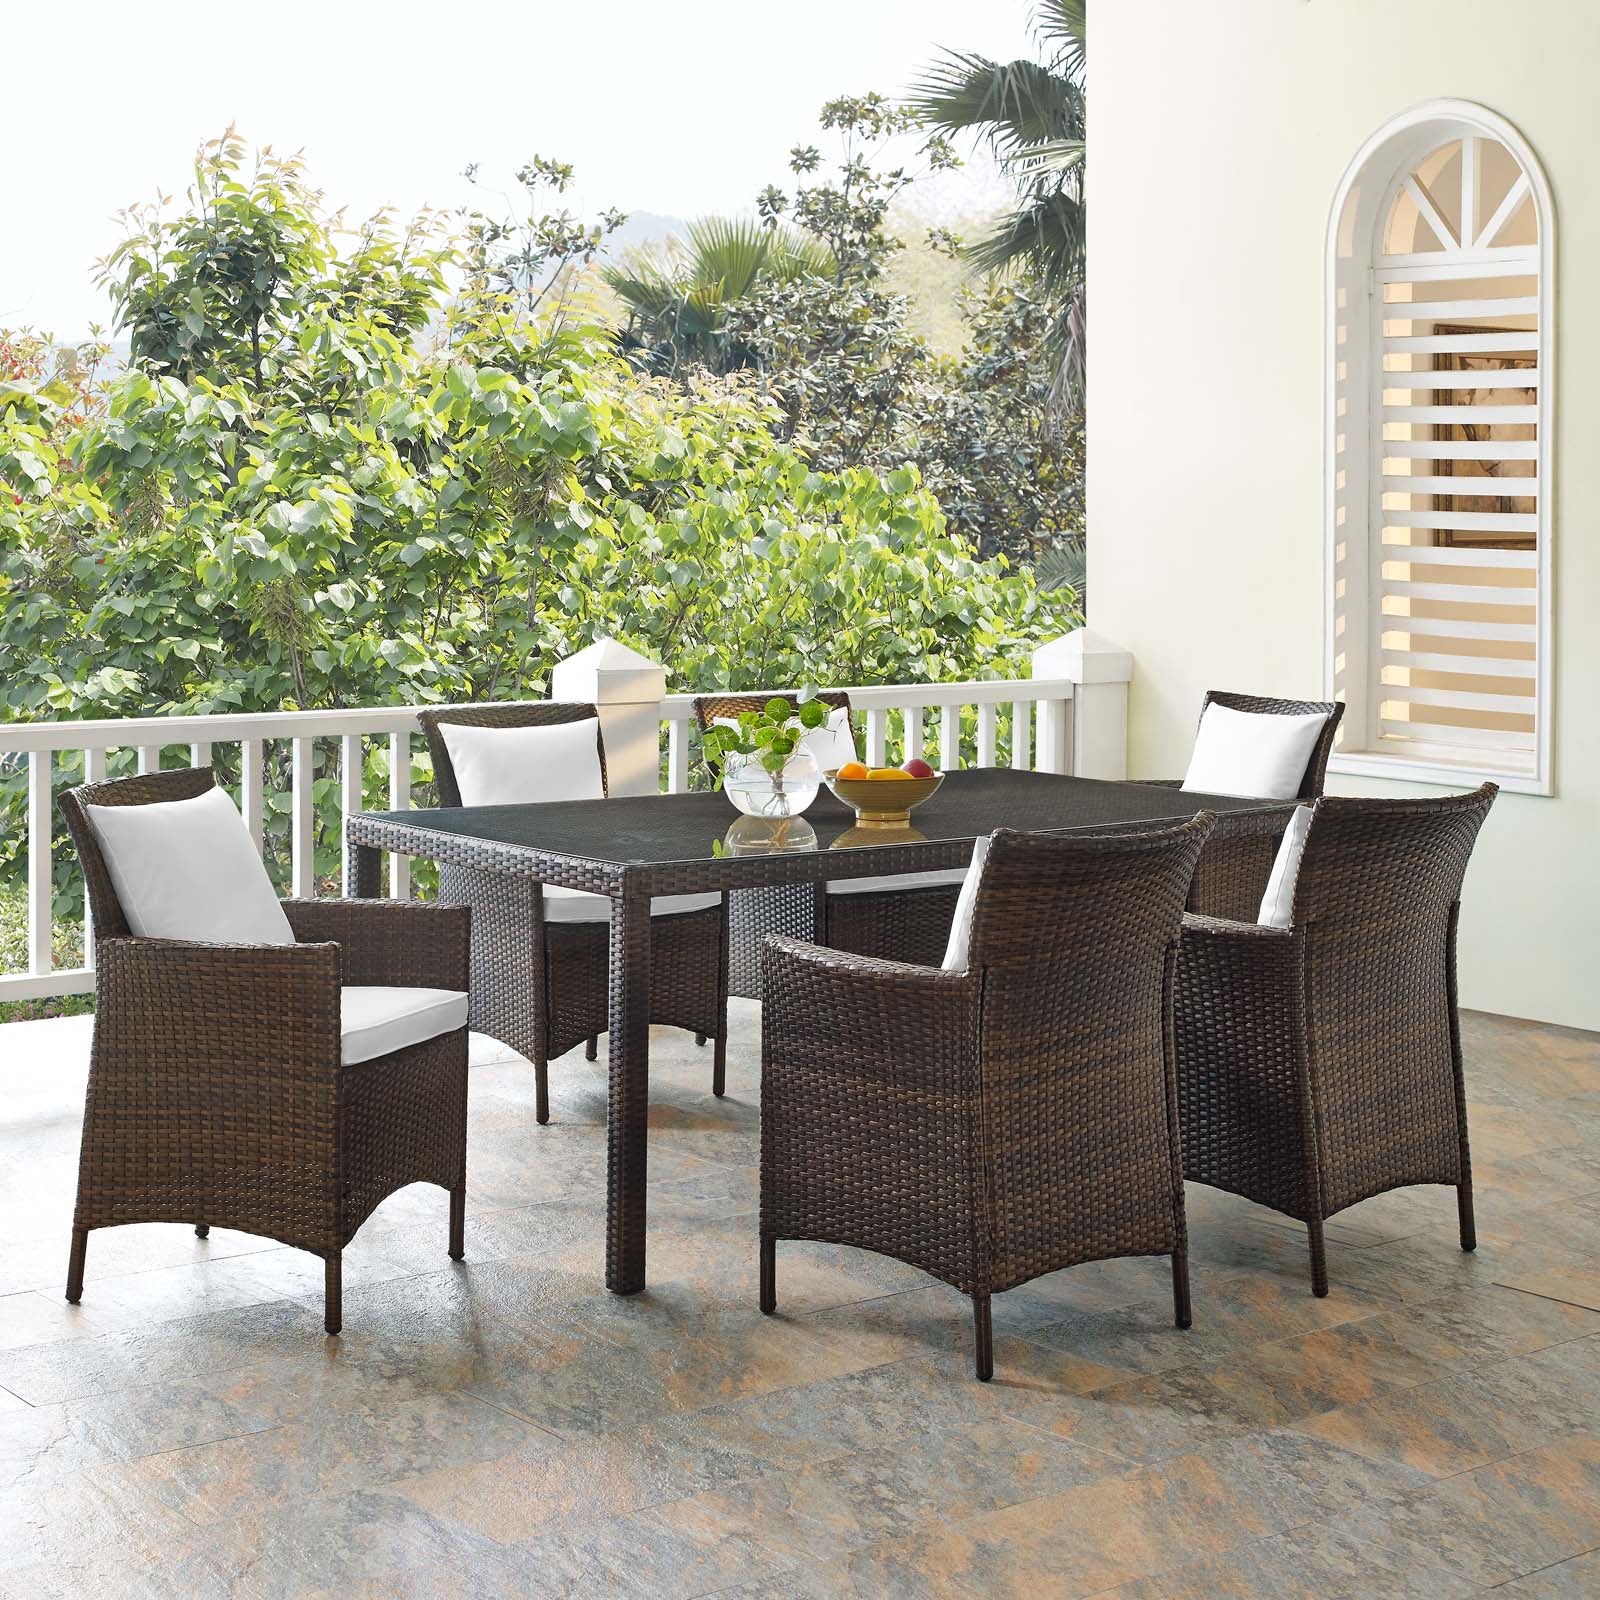 Modway Outdoor Dining Sets - Conduit 7 Piece Outdoor Patio Wicker Rattan Dining Set Brown White